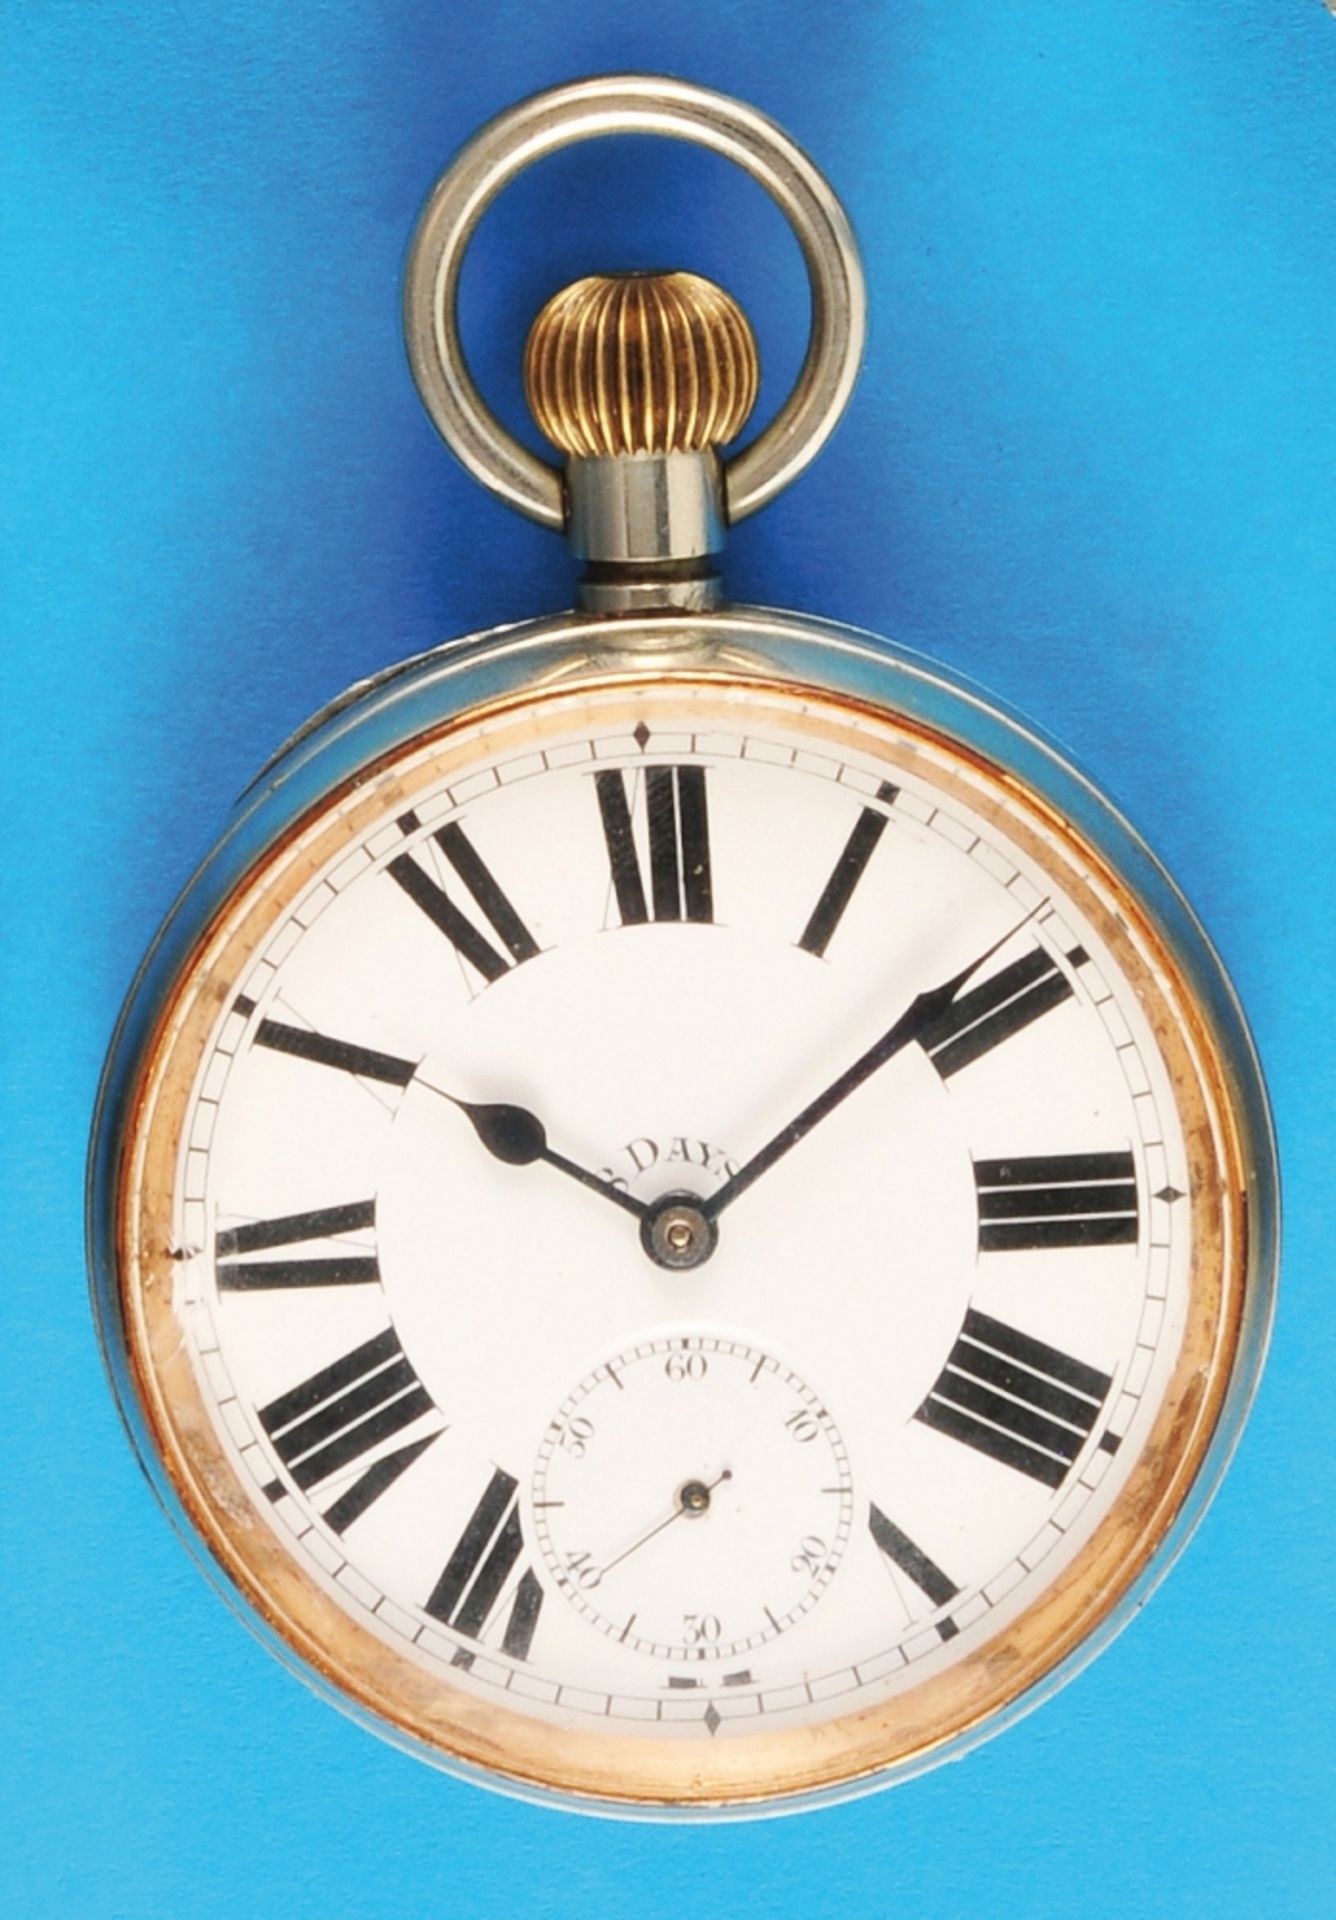 Large nickel silver pocket watch with 8-day movement, smooth case, enamel dial with Roman numerals, 